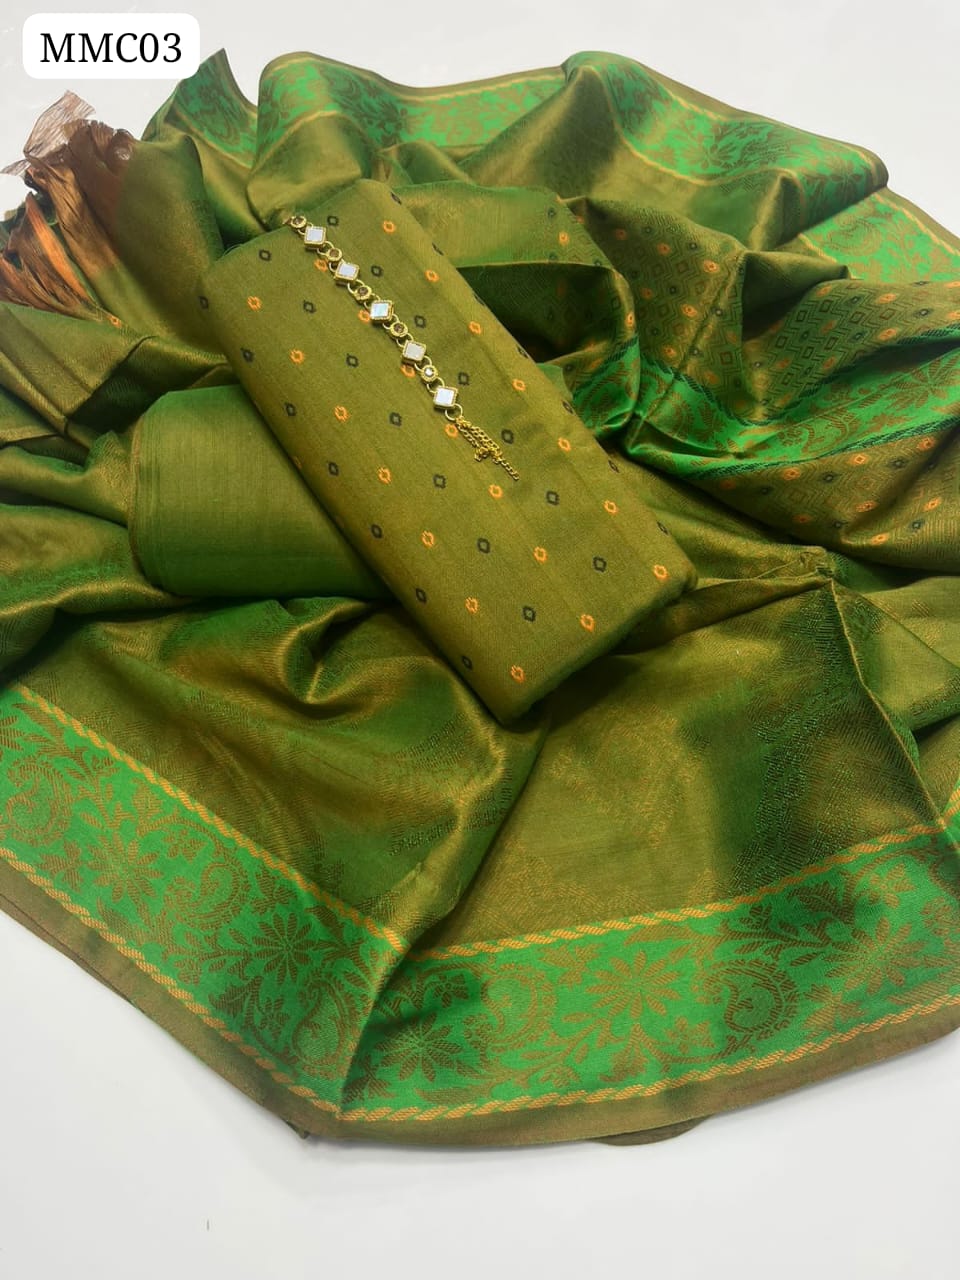 Stapple Sussi Fabric Bindi Style Shirt With Jacquard Style Dupatta And Stapple Sussi Plain Trouser 3Pc Dress